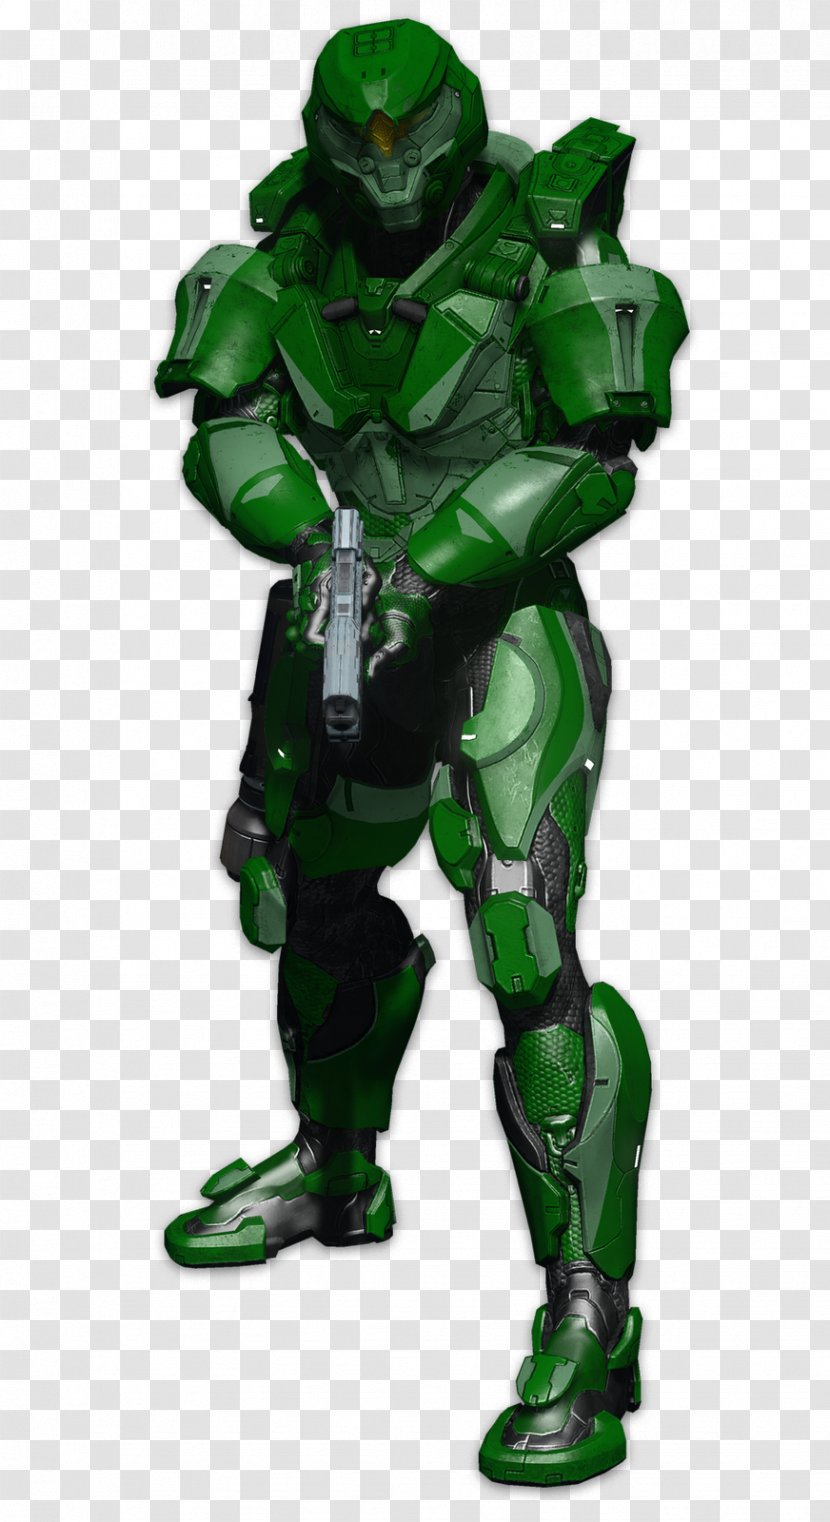 Halo 4 Halo: Spartan Assault Reach The Master Chief Collection - Wars Transparent PNG